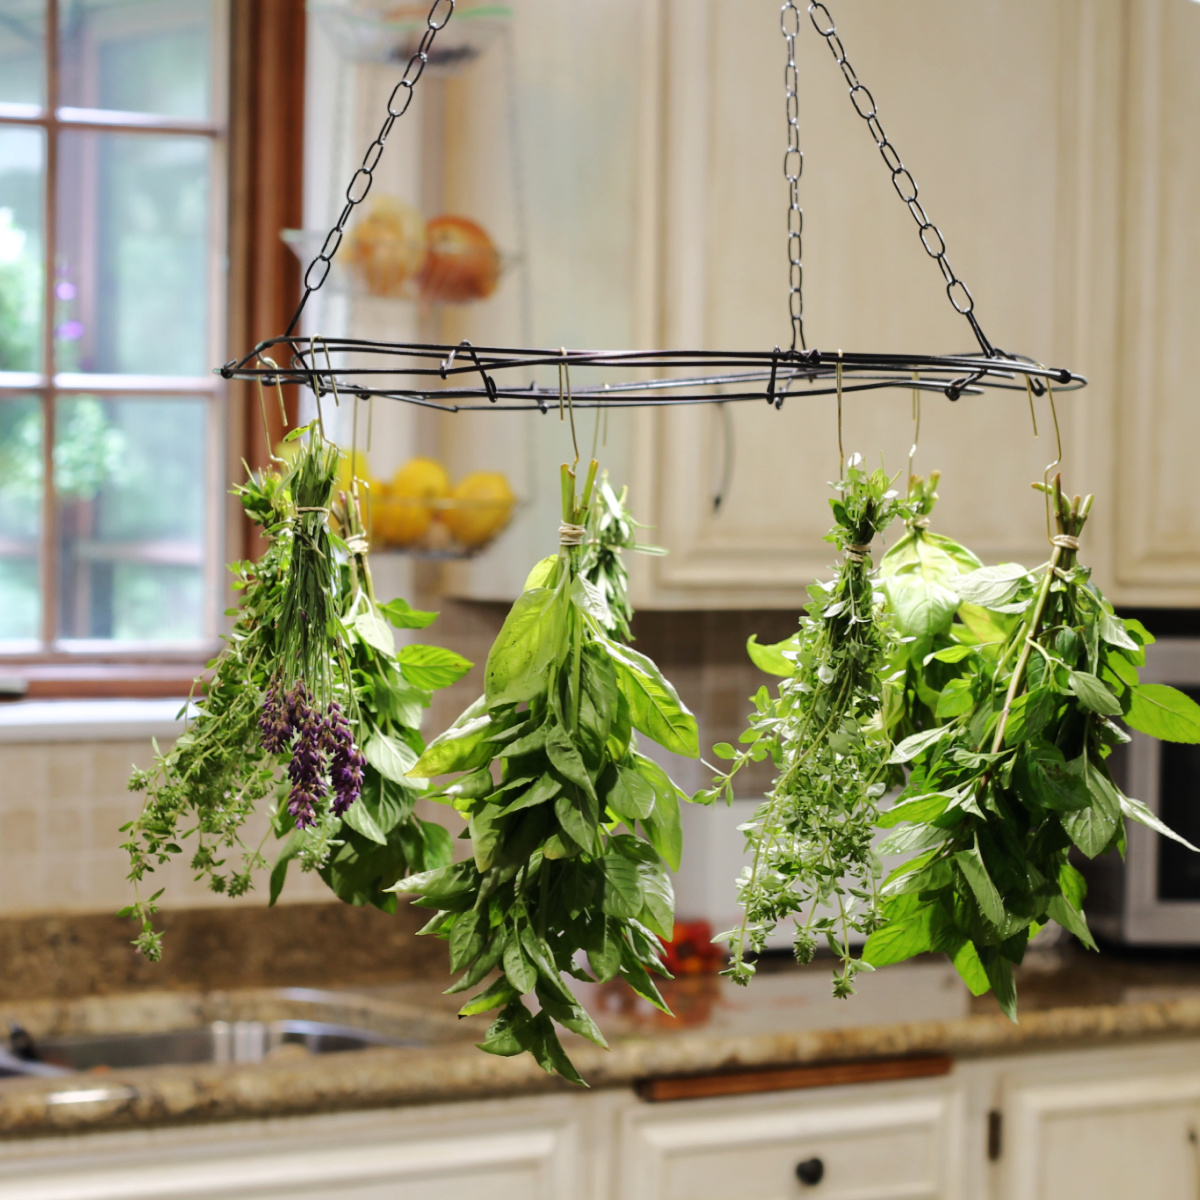 Fresh herbs in bundles hanging from a wire rack in the kitchen